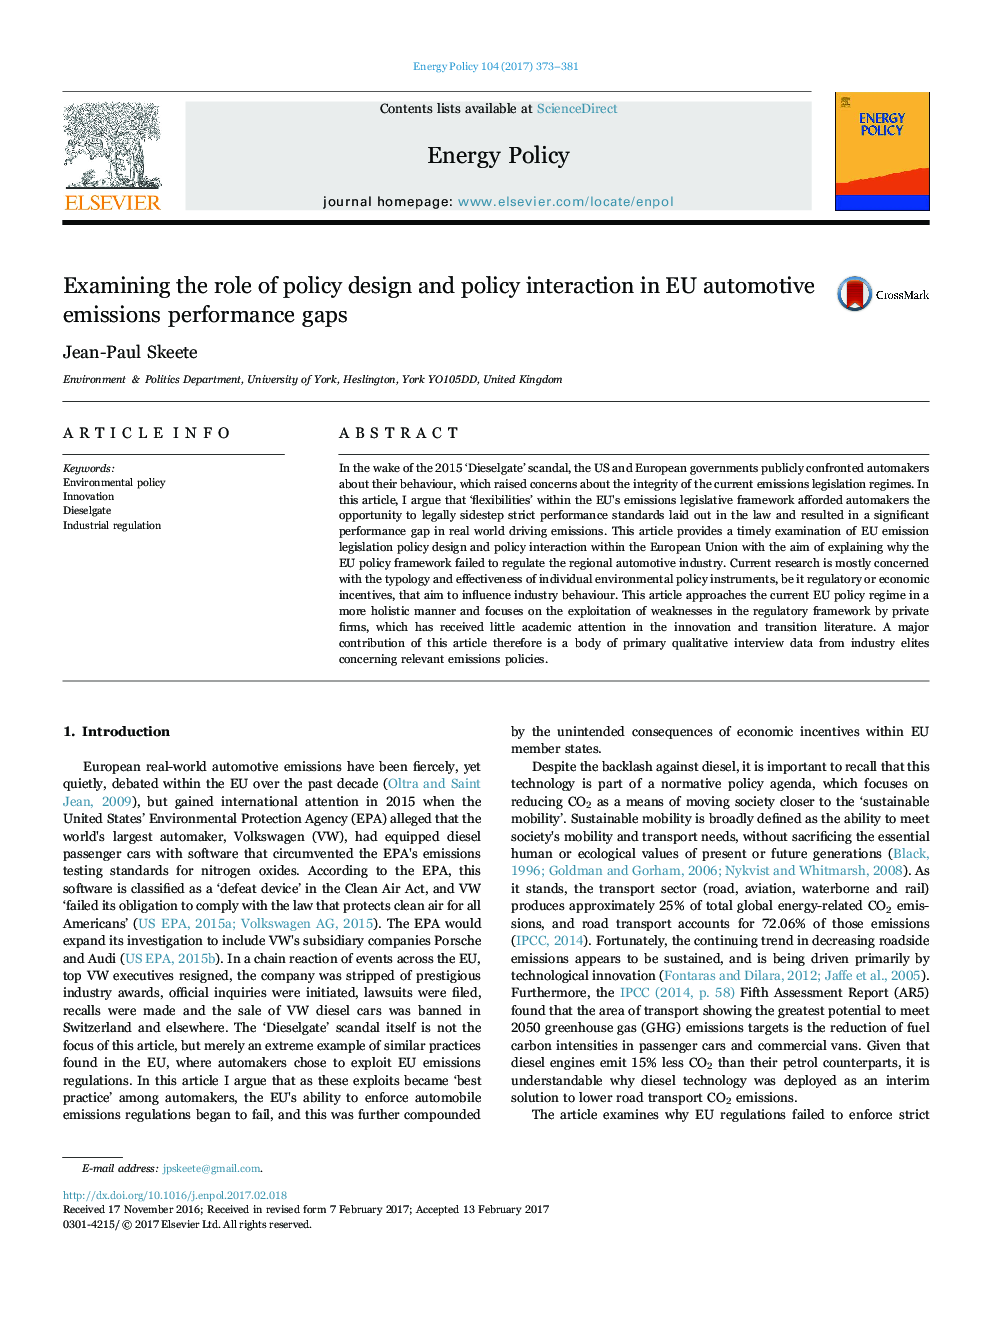 Examining the role of policy design and policy interaction in EU automotive emissions performance gaps